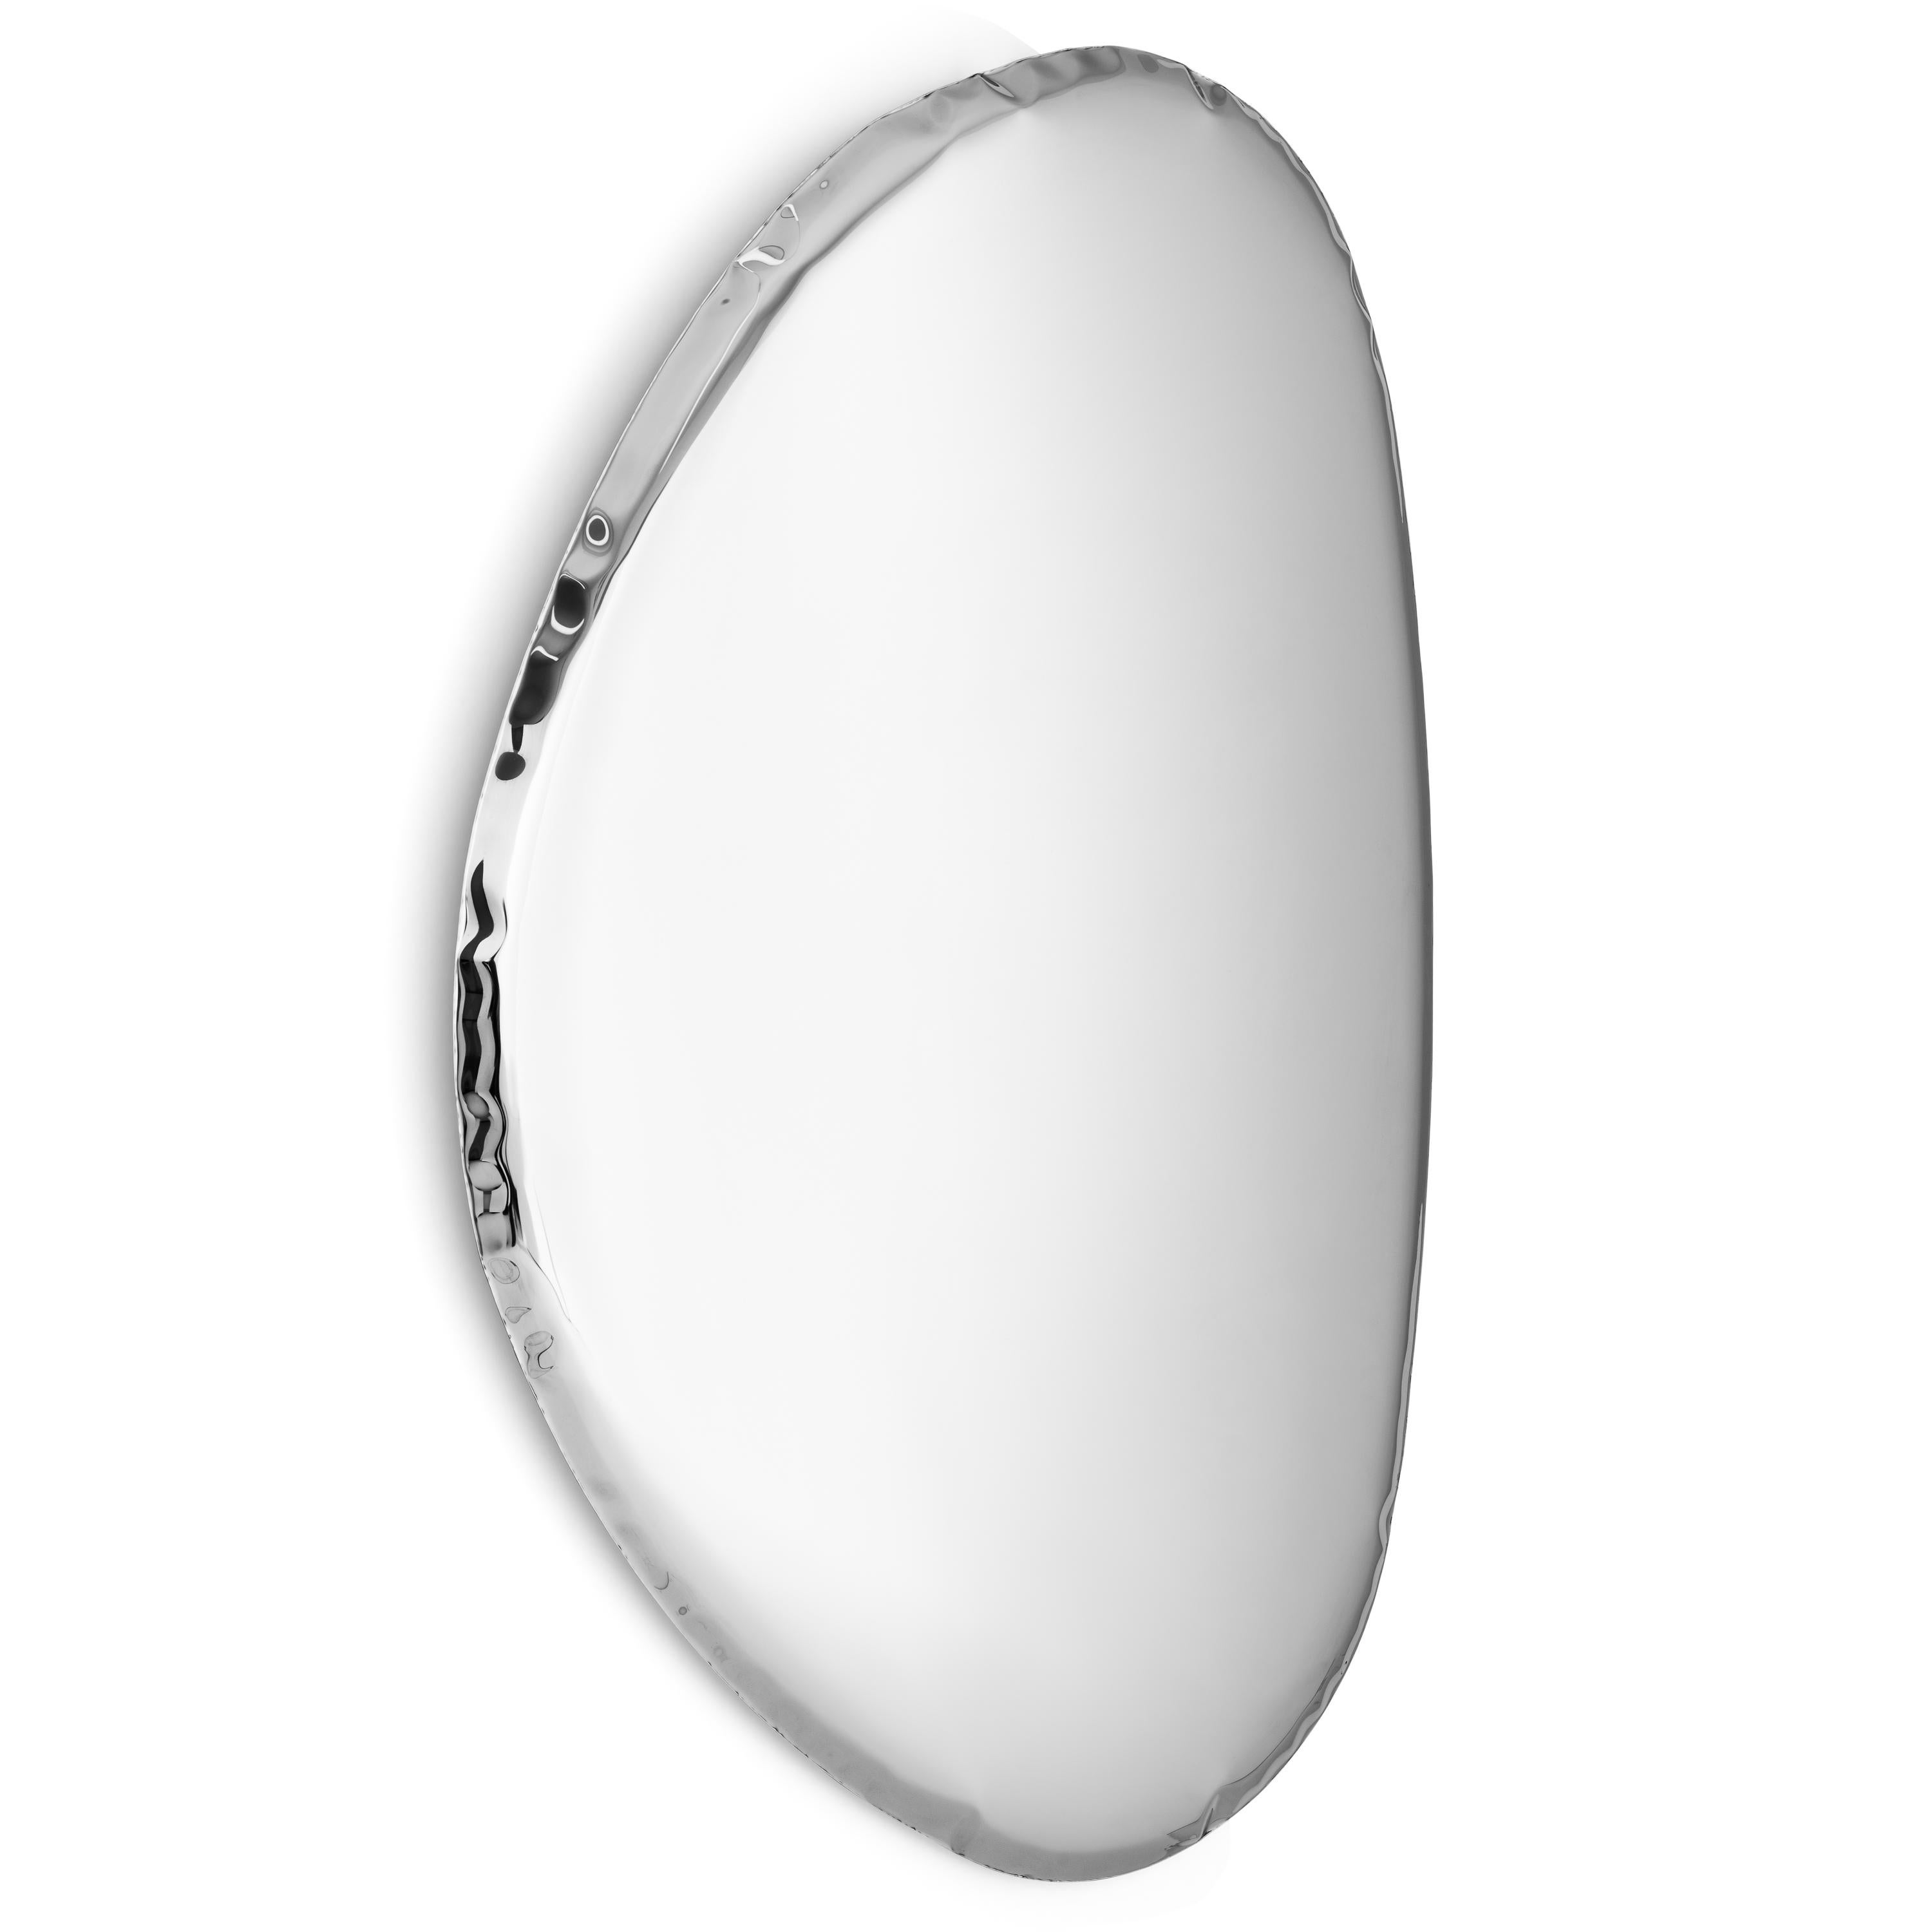 Stainless Steel Tafla O2 wall mirror by Zieta
Dimensions: D 6 x W 97 x H 150 cm 
Material: Stainless steel
Finish: Lacquered. 
Available finishes: Stainless Steel, White Matt, Sapphire/Emerald, Sapphire, Emerald, Deep space blue, Dark matter, or